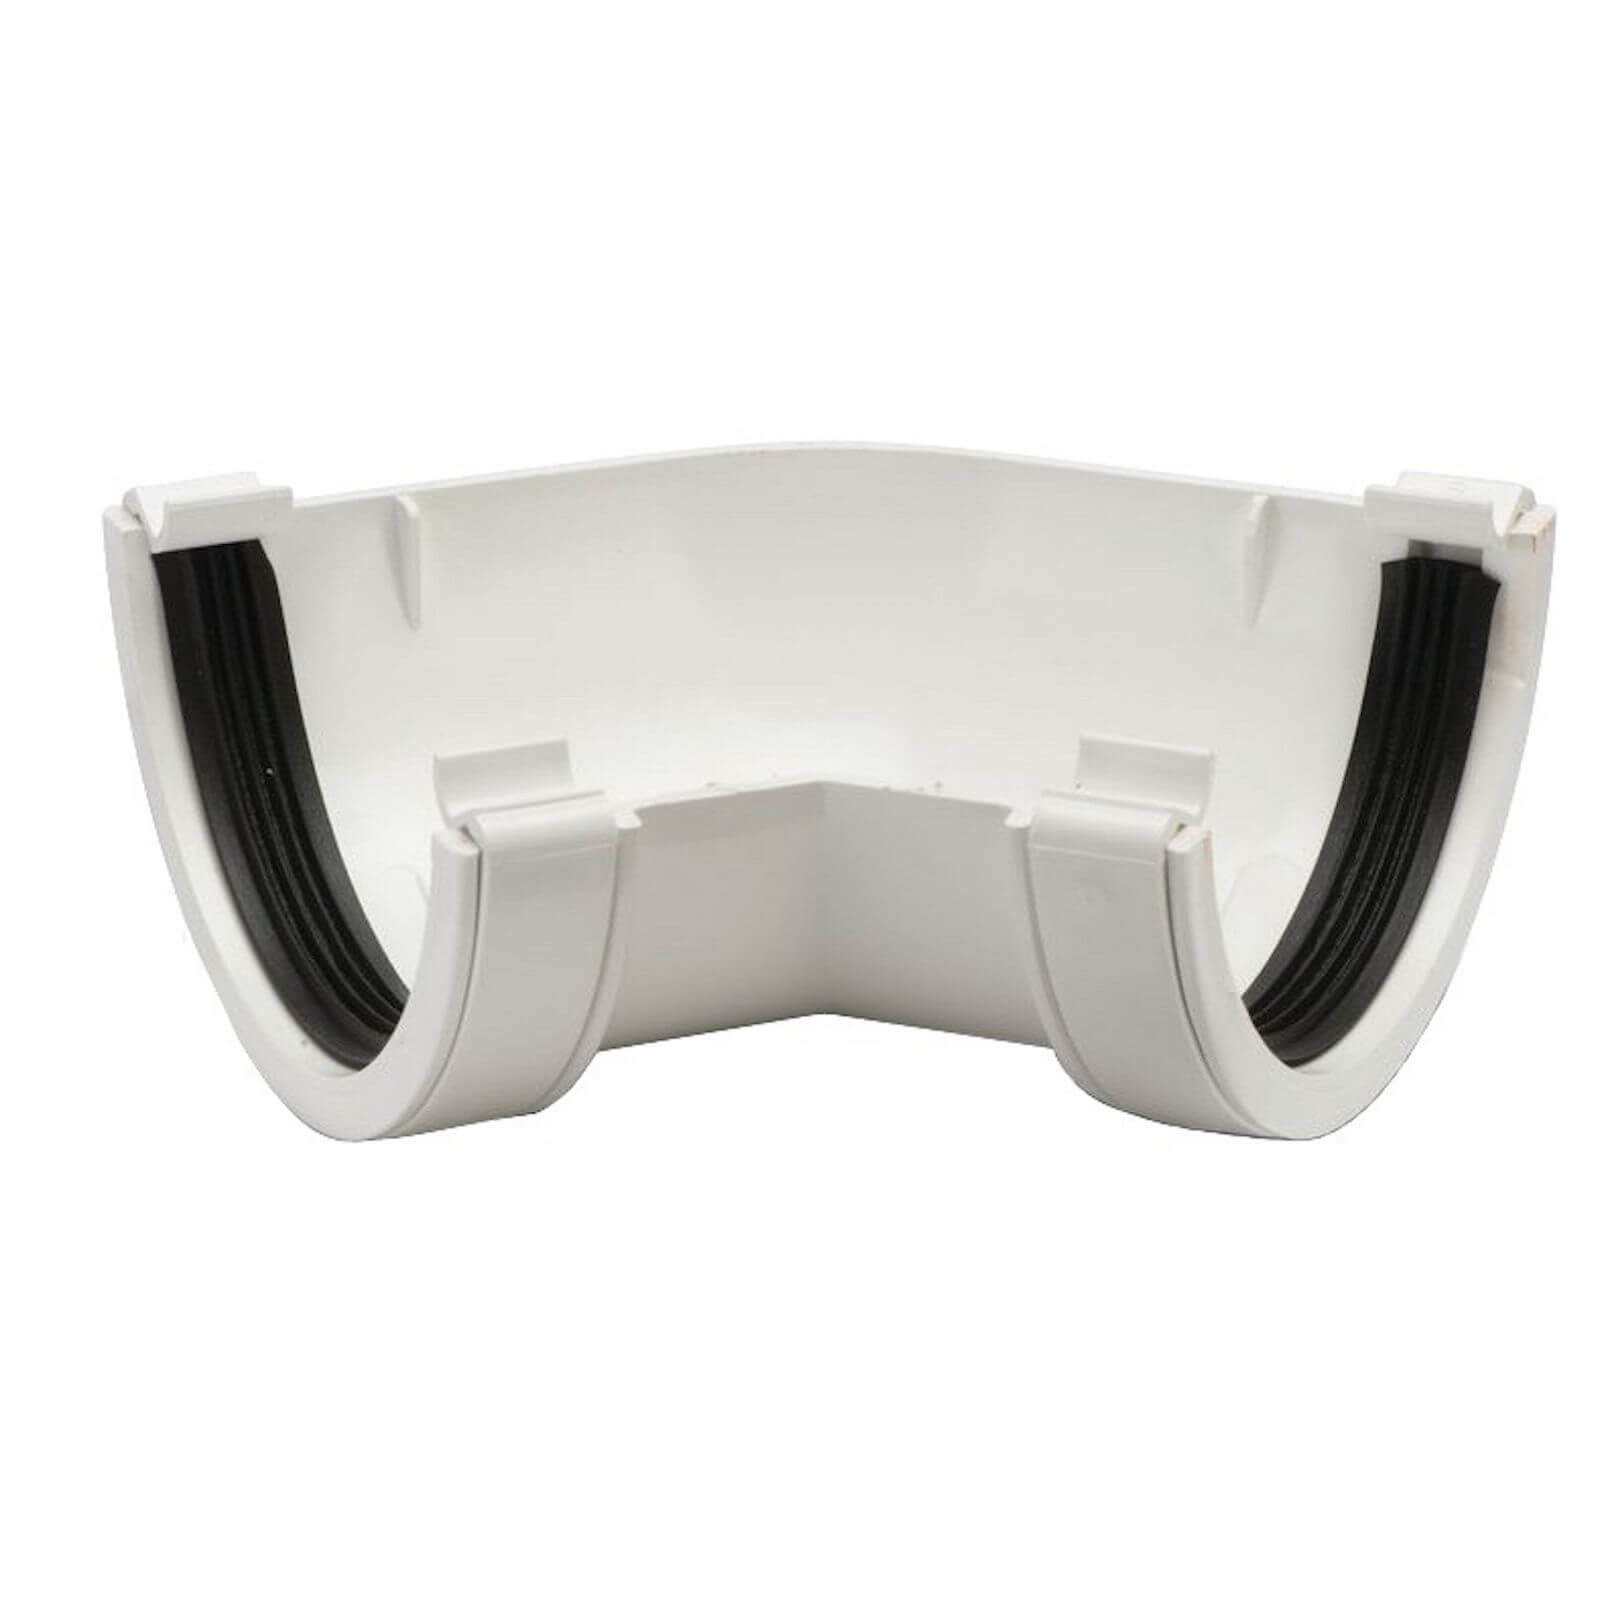 Polypipe Half Round Gutter Angle - 112mm x 135 Degree - White